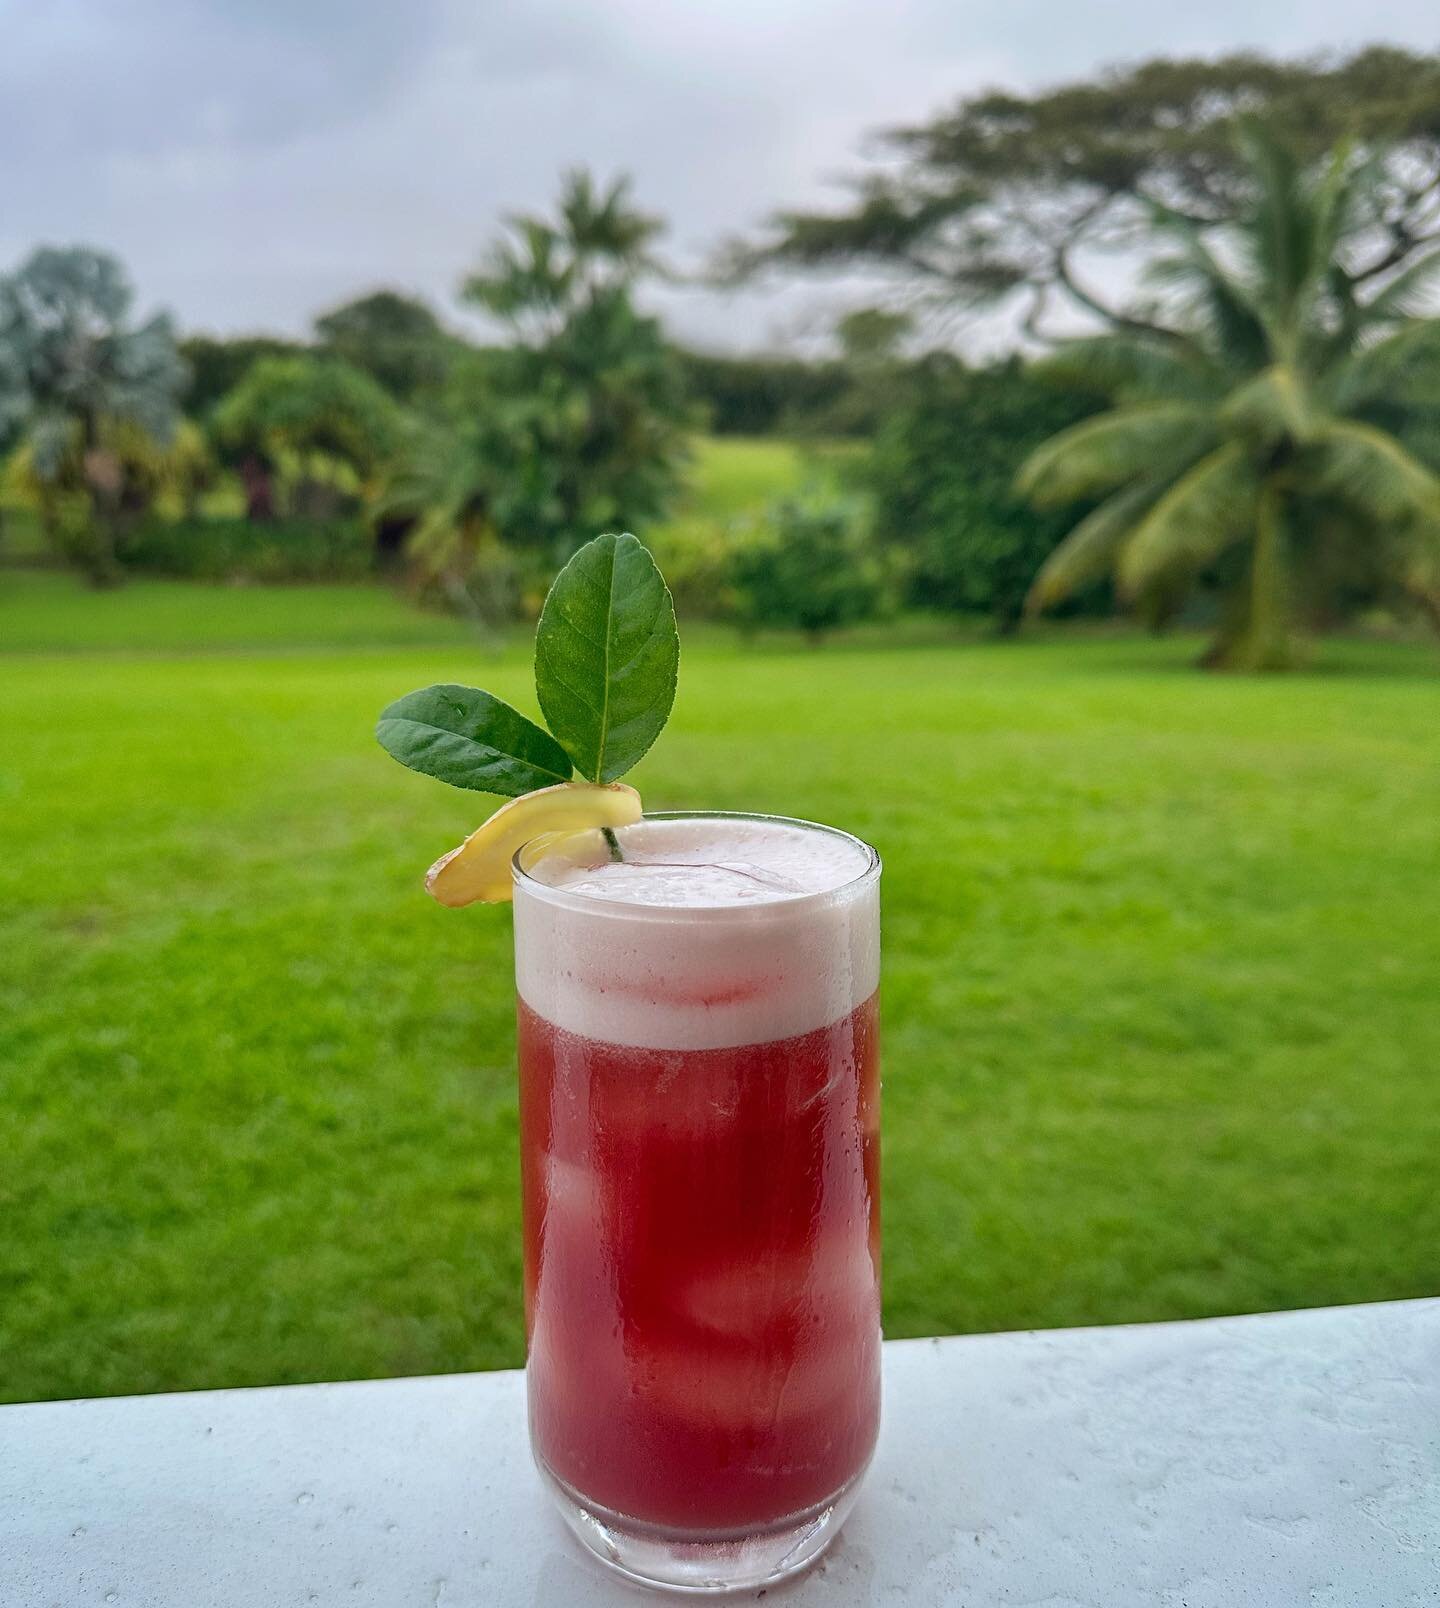 Introducing...&ldquo;Akala&rdquo;

This cocktail was inspired by the island of Kauai and the delicious juice offerings of @kauaijuiceco. While very few can make this recipe exactly, we offer suggested substitutions and also simply see this as an exam